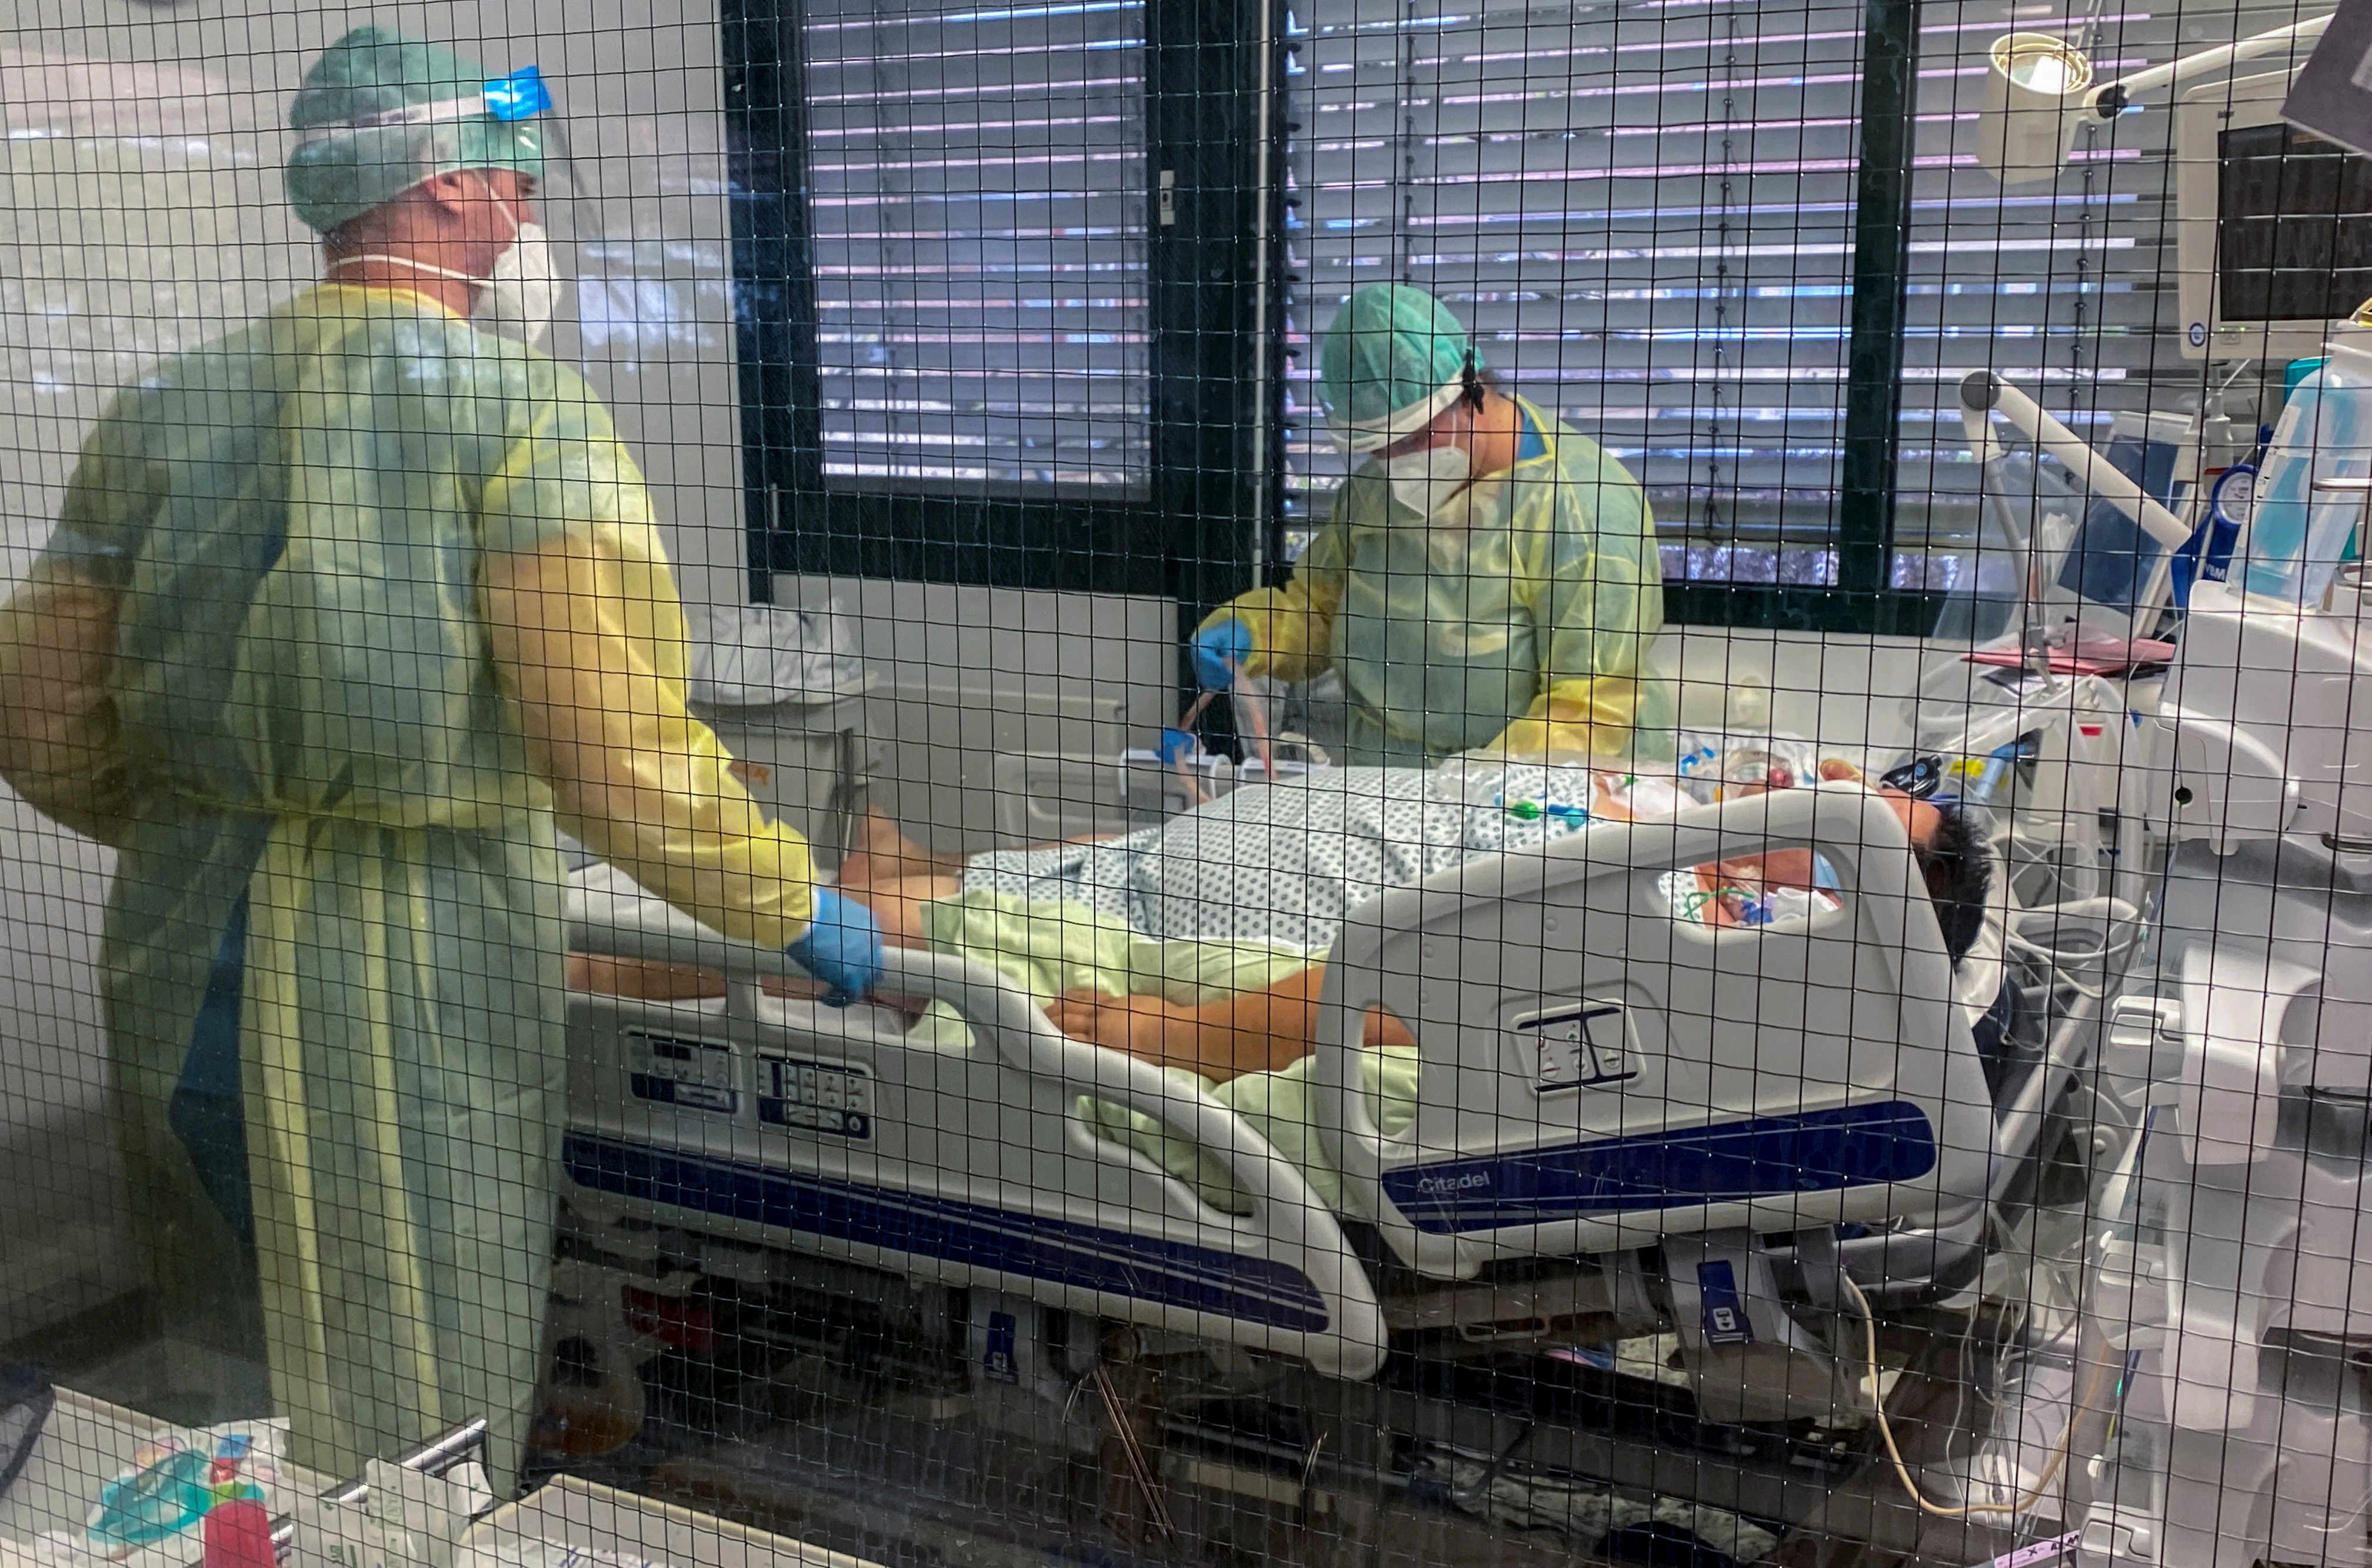 Medical staff members of Munchen Klinik Schwabing hospital take care of a patient infected with the coronavirus disease (COVID-19) in the intensive care unit in Munich